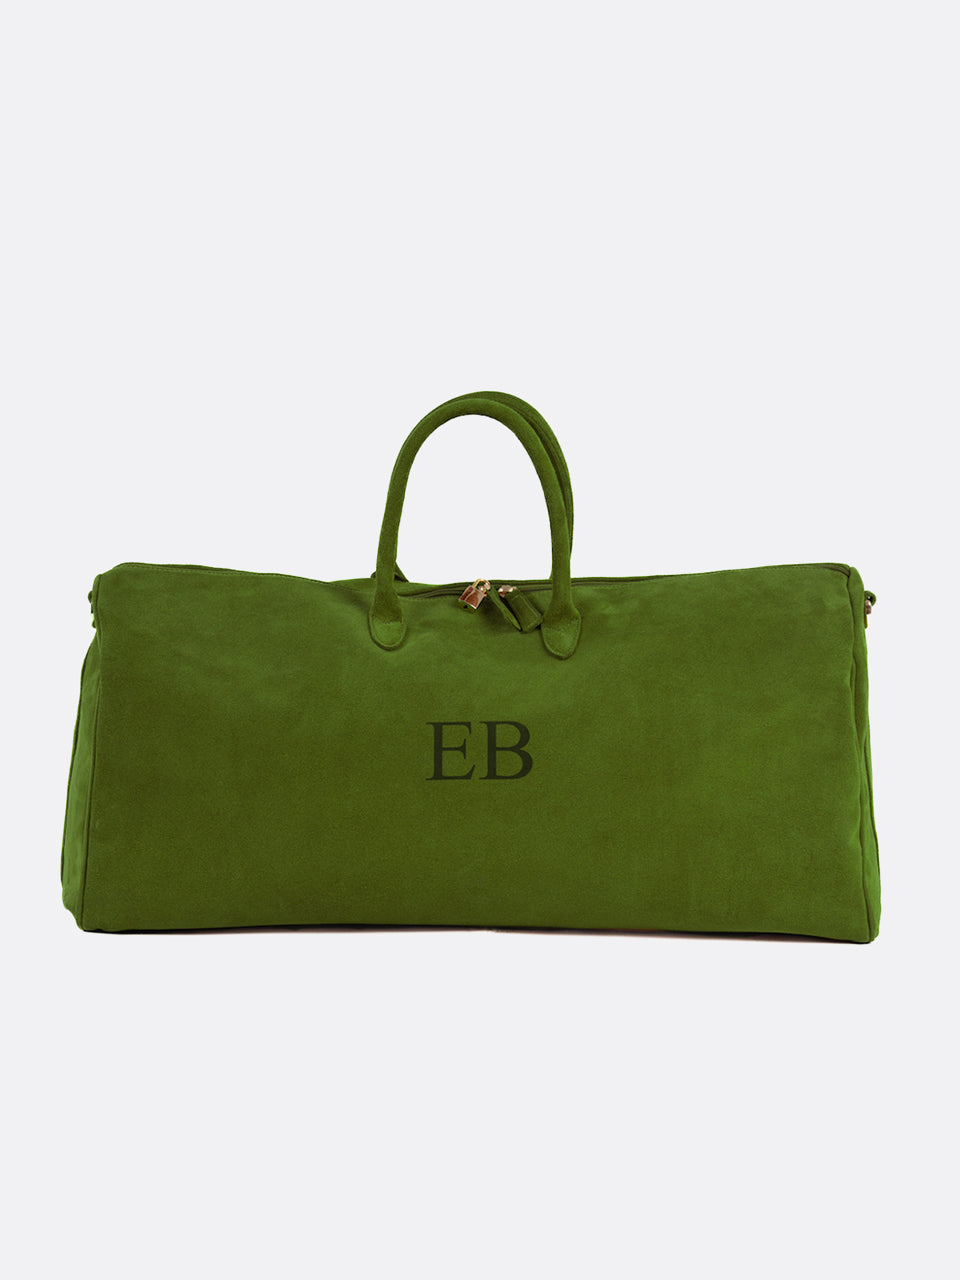 Unisex Italian Suede Leather Globetrotter Travel Bag - Green - 07